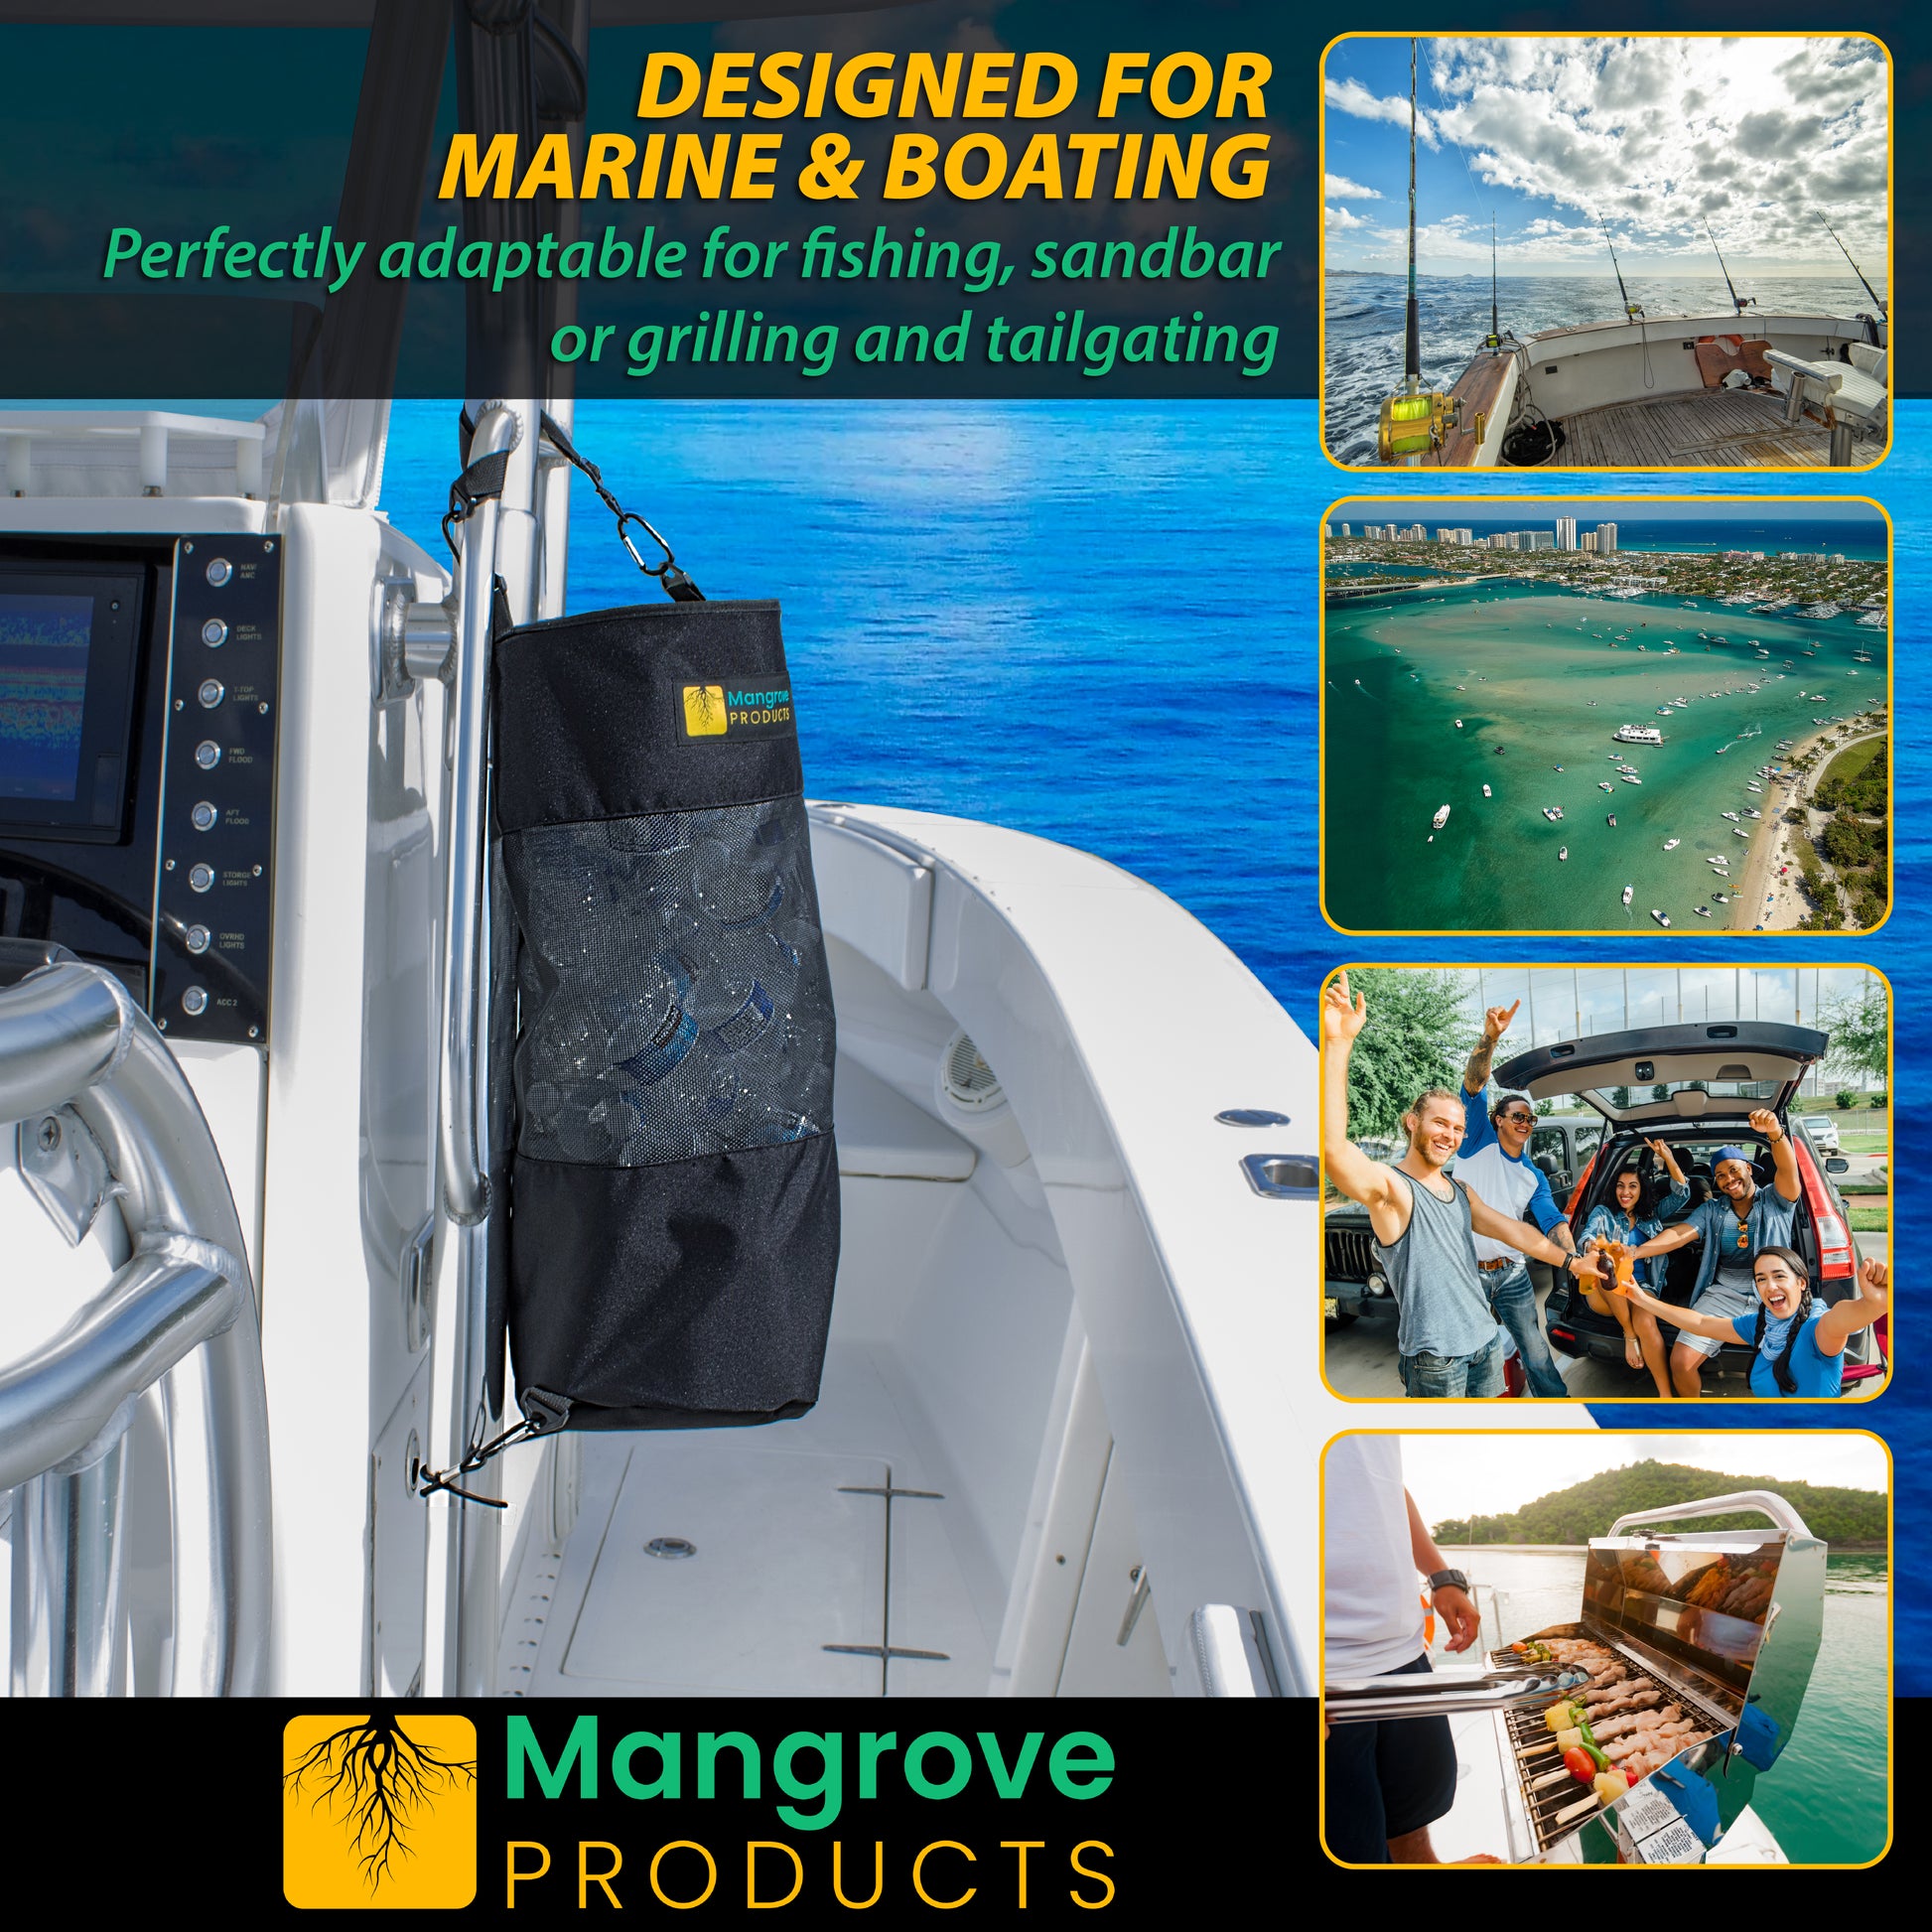 Mangrove Products: Portable Boat Trash Can, Reusable Trash Bag, Boating Equipment, Boat Storage, Boat Accessories Marine, Pontoon Boat Accessories, F